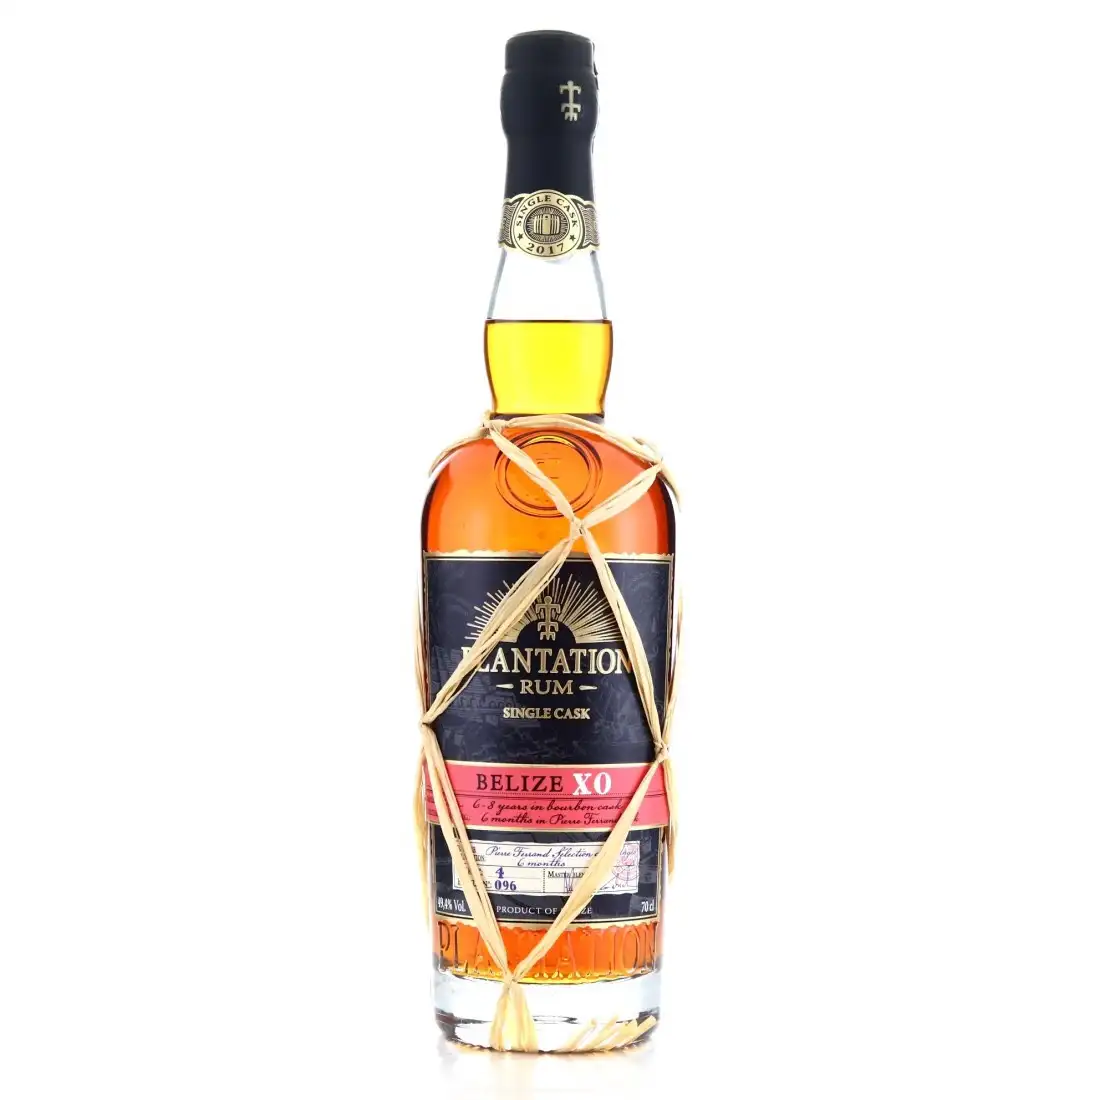 Image of the front of the bottle of the rum Plantation Belize XO Single Cask